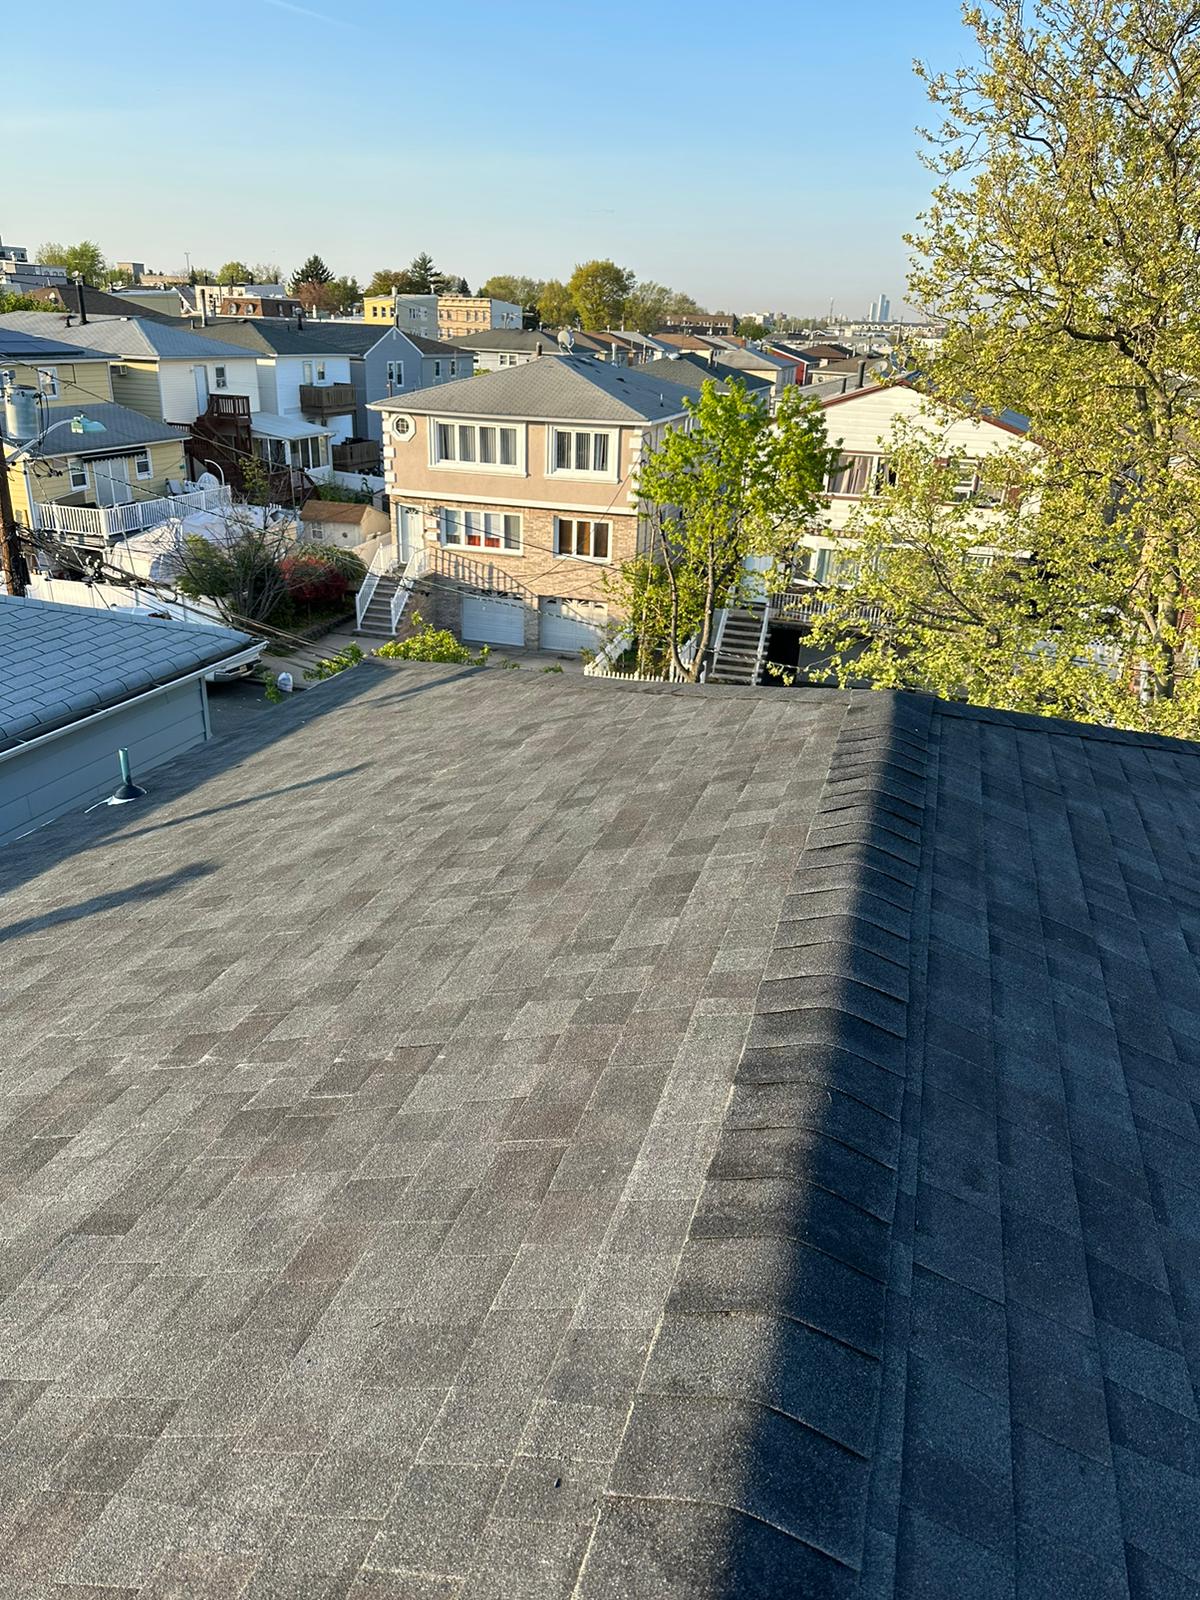 All Pro Roofing & Chimney 24/7 Roof Repair